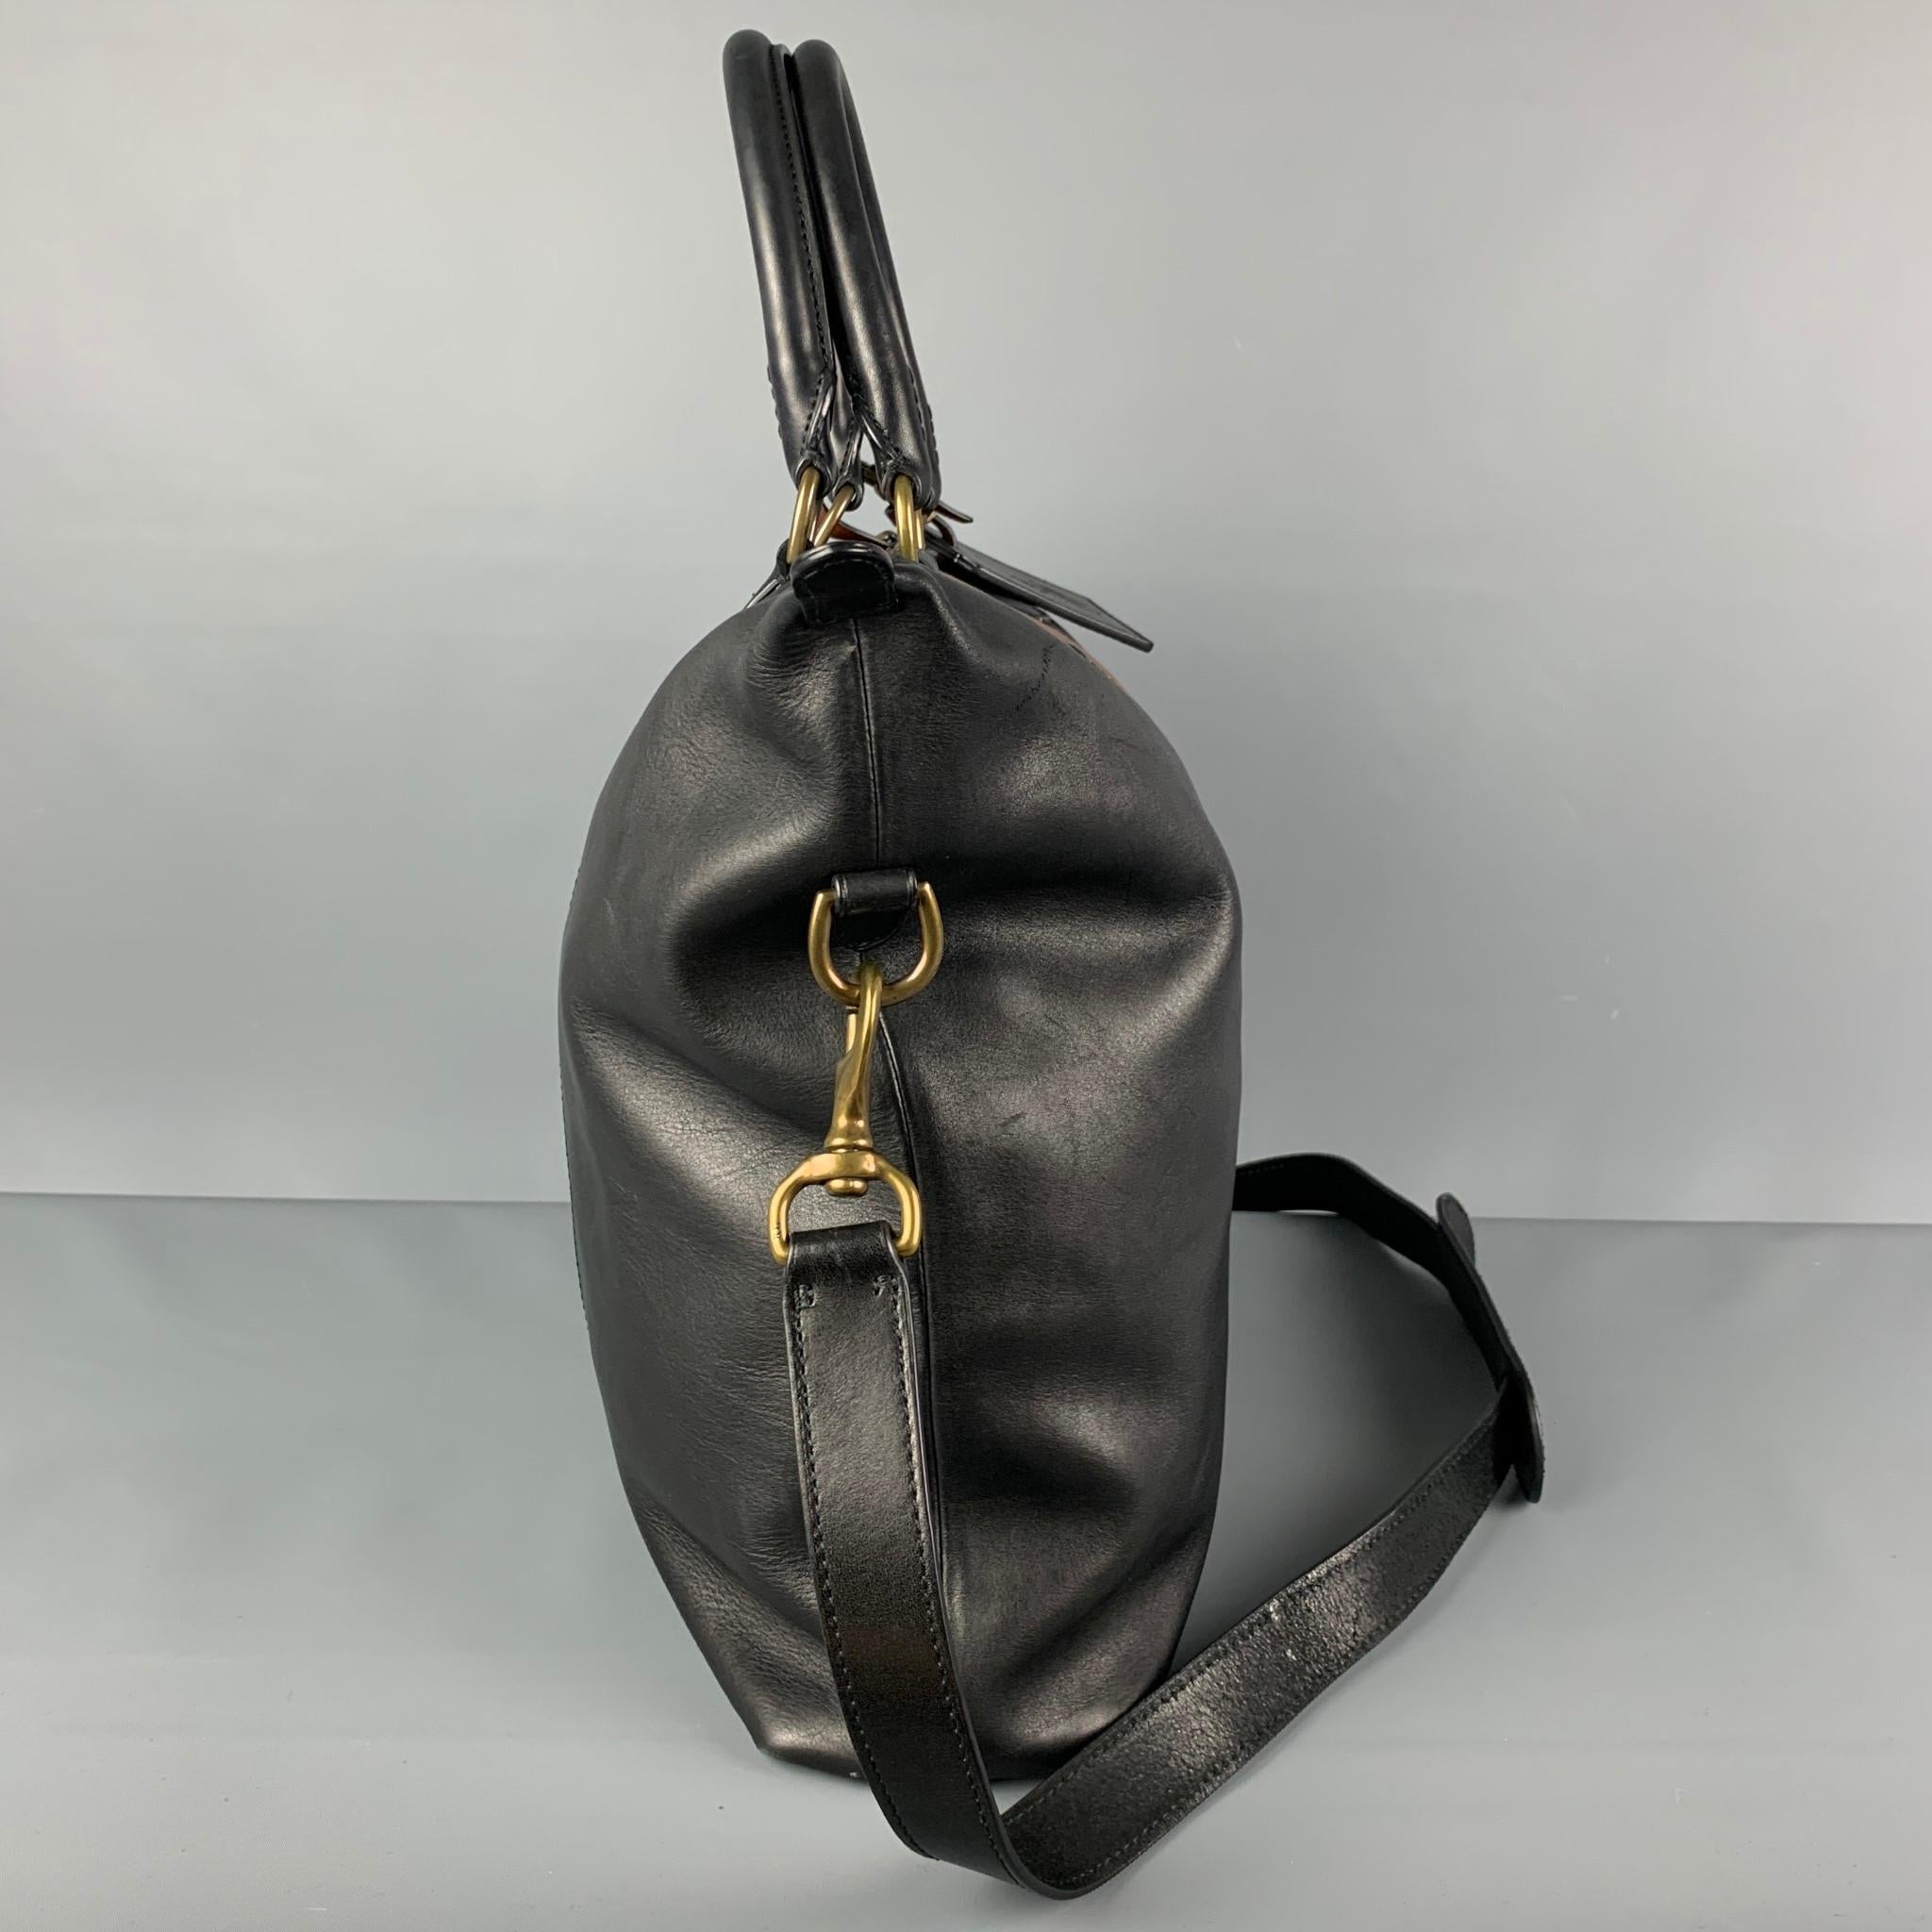 POLO by RALPH LAUREN tote bag comes in a black & brown color block leather featuring brass hardware, top handles, detachable shoulder strap, interior pockets, and a top zipper closure. 

Very Good Pre-Owned Condition. Light